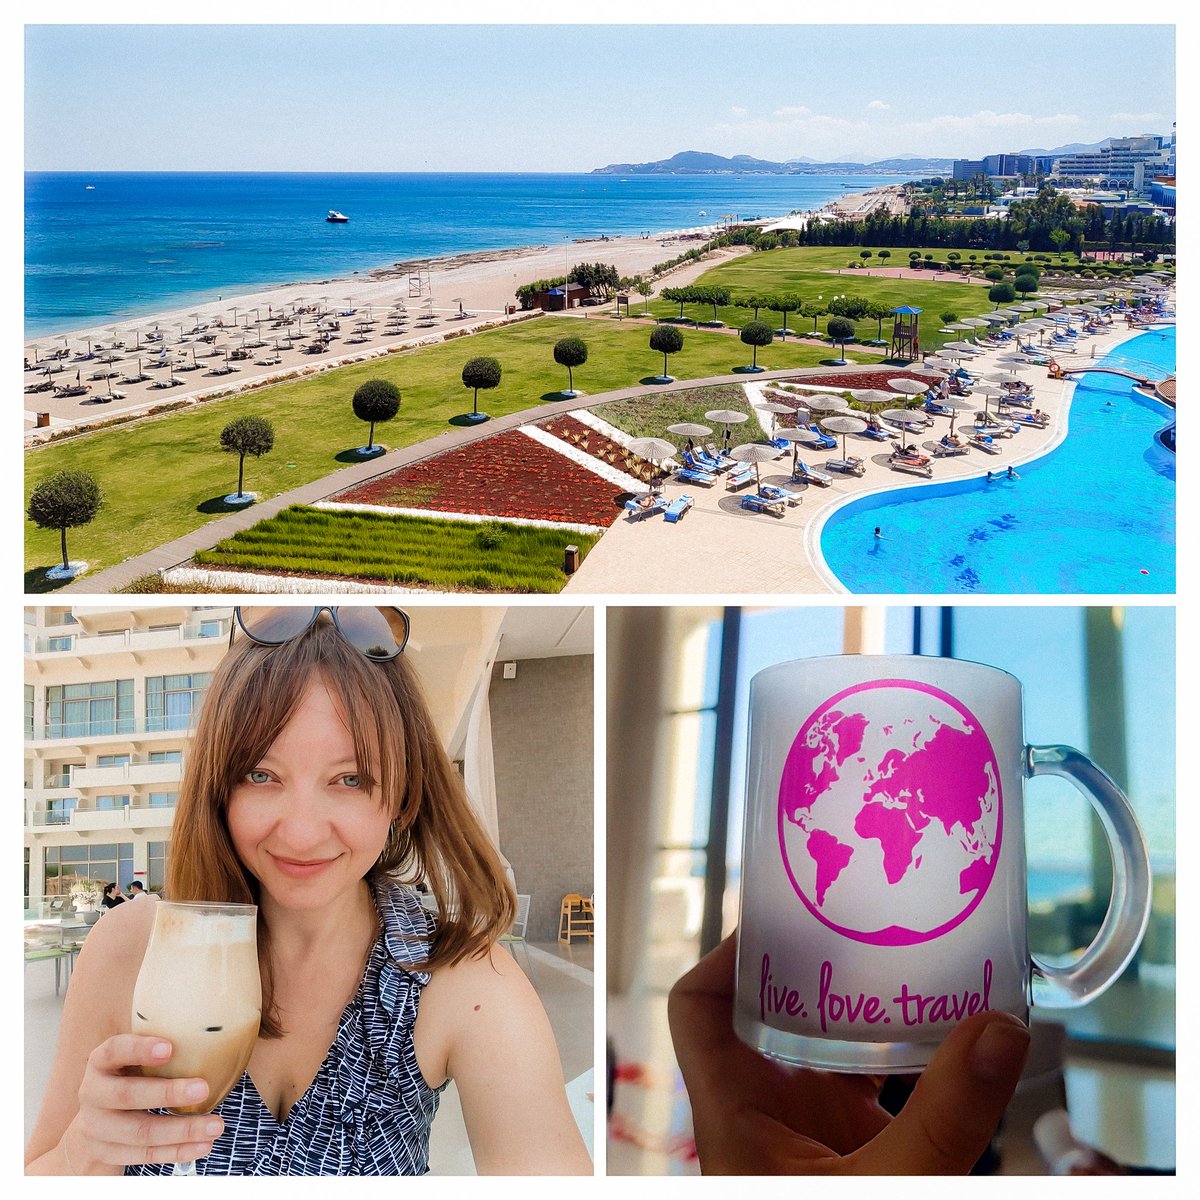 It's finally here! @PinkPangea's writer's retreat in Rhodes, Greece. 🇬🇷☀️🖋️ 5 days of guided exercises in a small group, interactive writing activities, day trips, yoga, and - of course - iced coffee by the pool. Let the words flow... #WritingCommunity